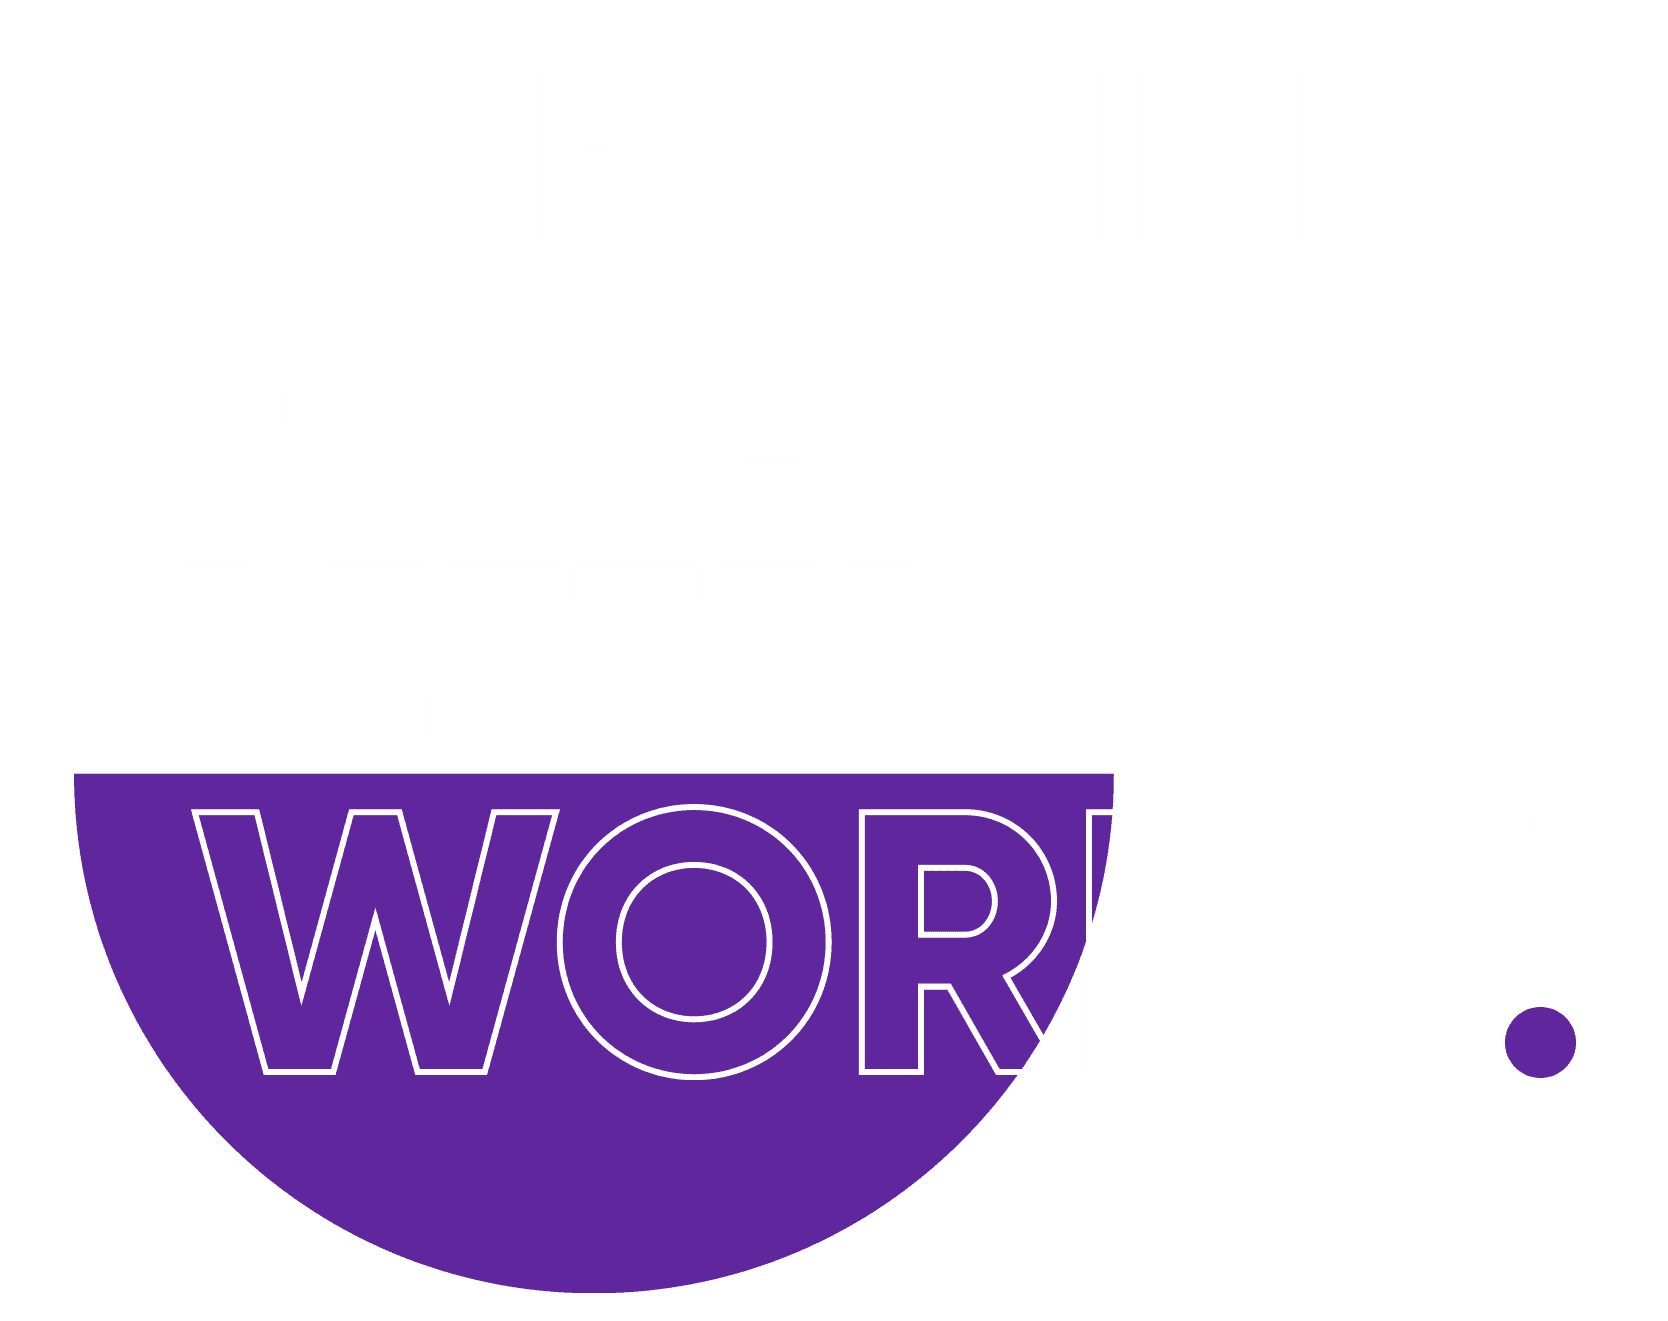 Marketing for a better world graphic